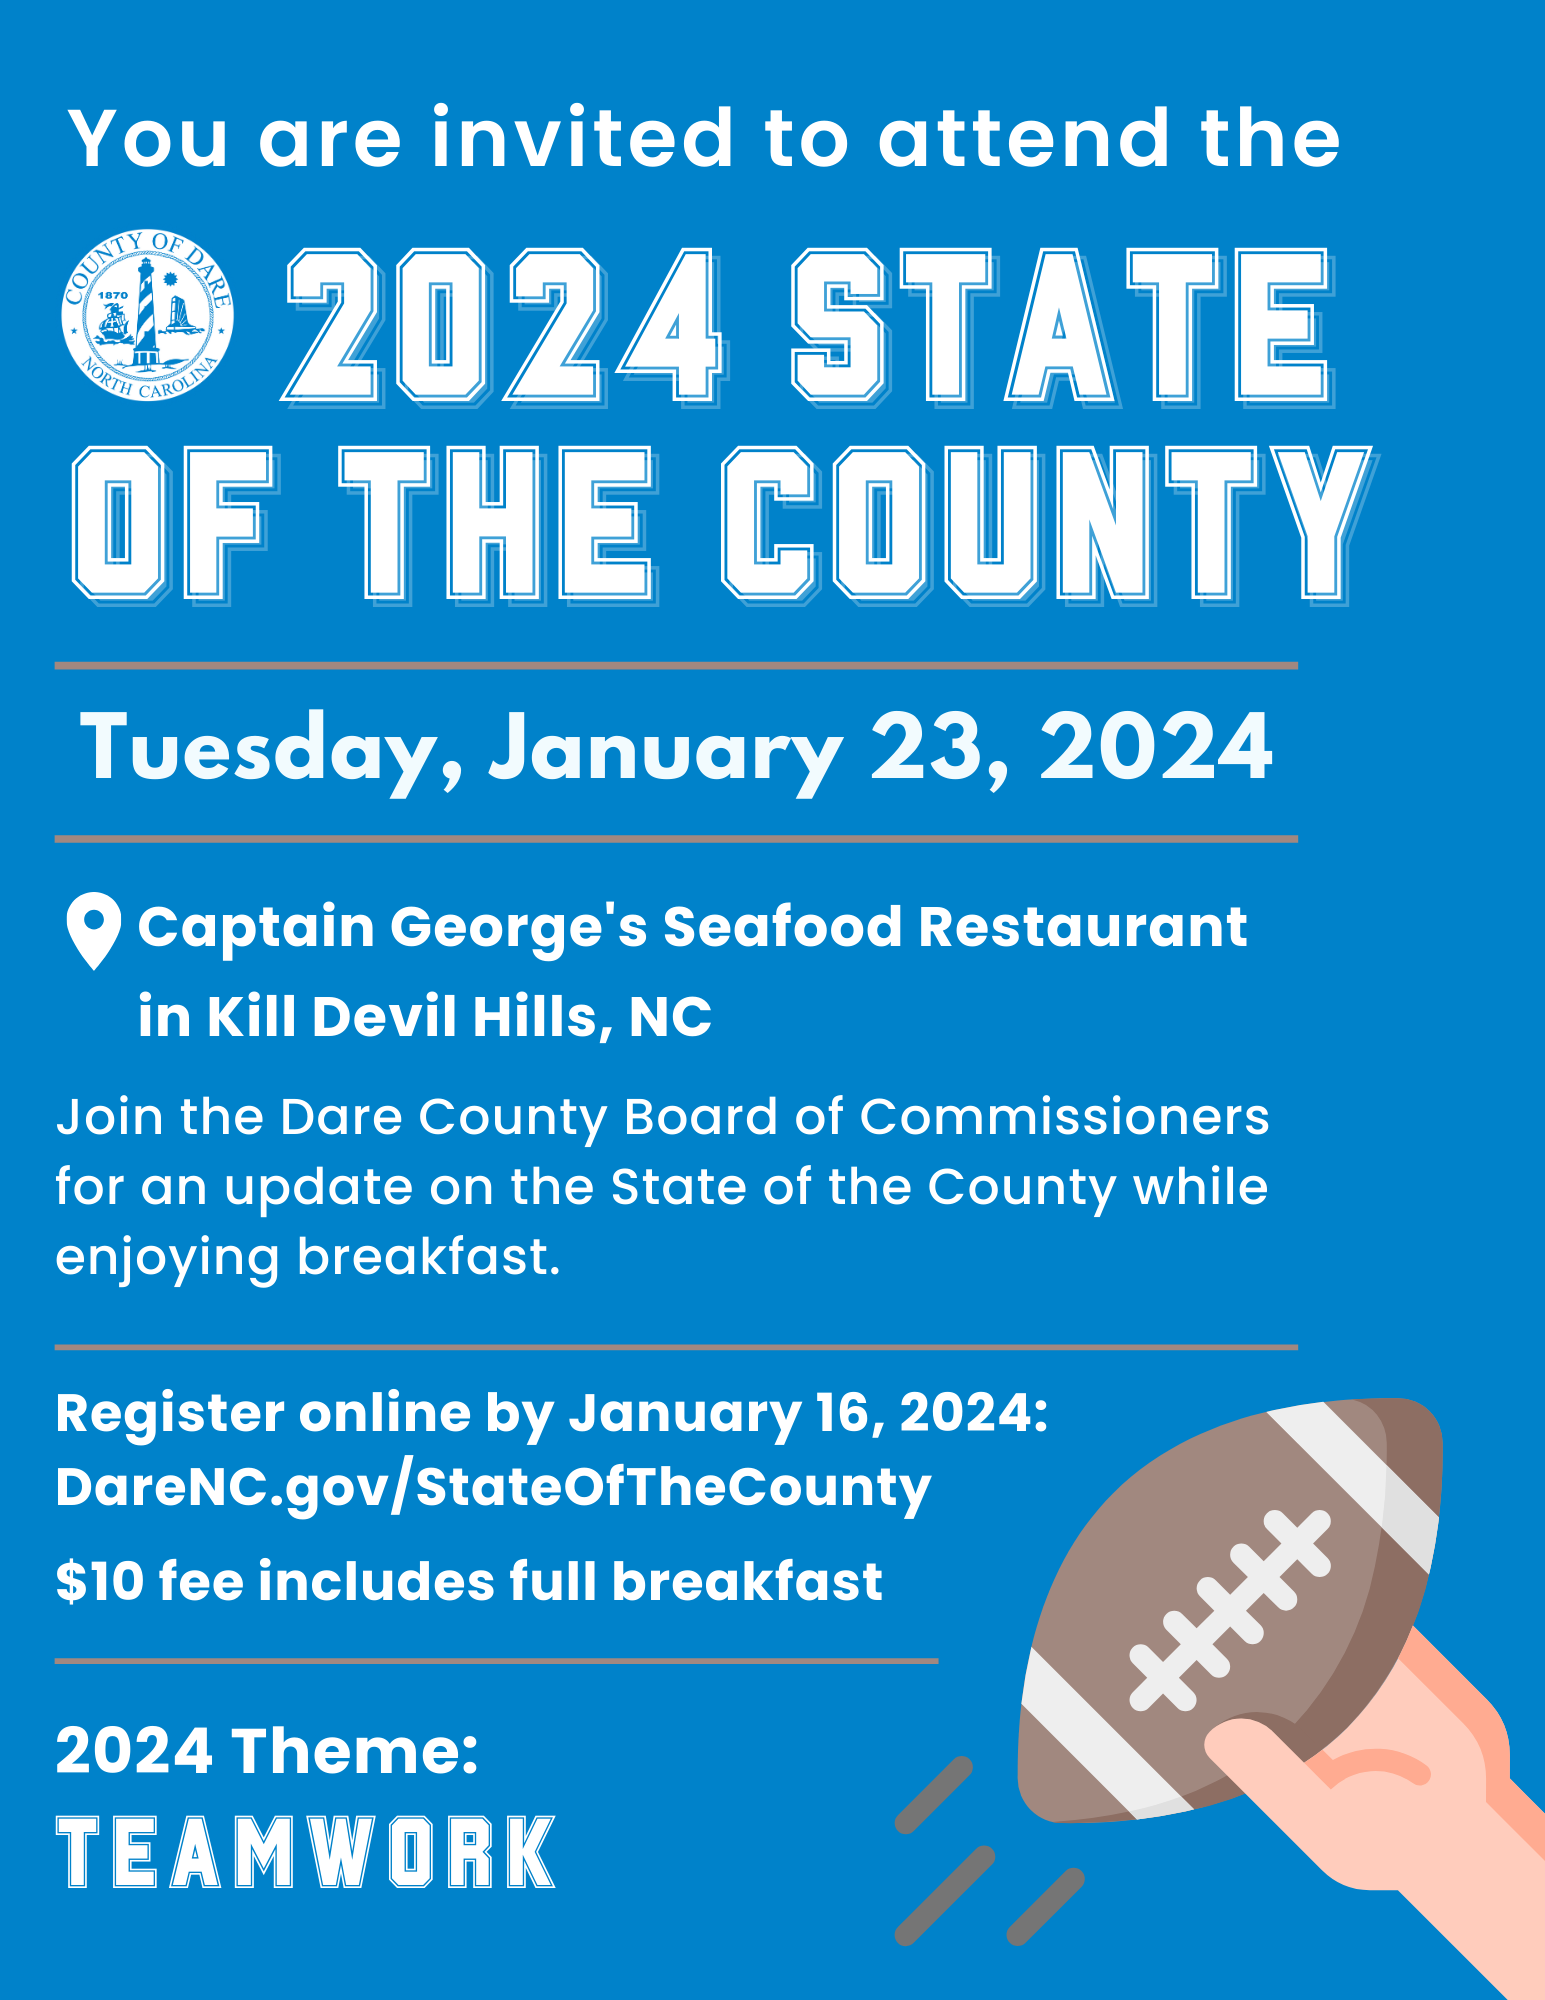 You are invited to the 2024 State of the County Tuesday, January 23, 2024  at Captain George's Seafood Restaurant in Kill Devil Hills, NC | Join the Dare County Board of Commissioners for an update on the State of the County while enjoying breakfast. Register online by January 16, 2024